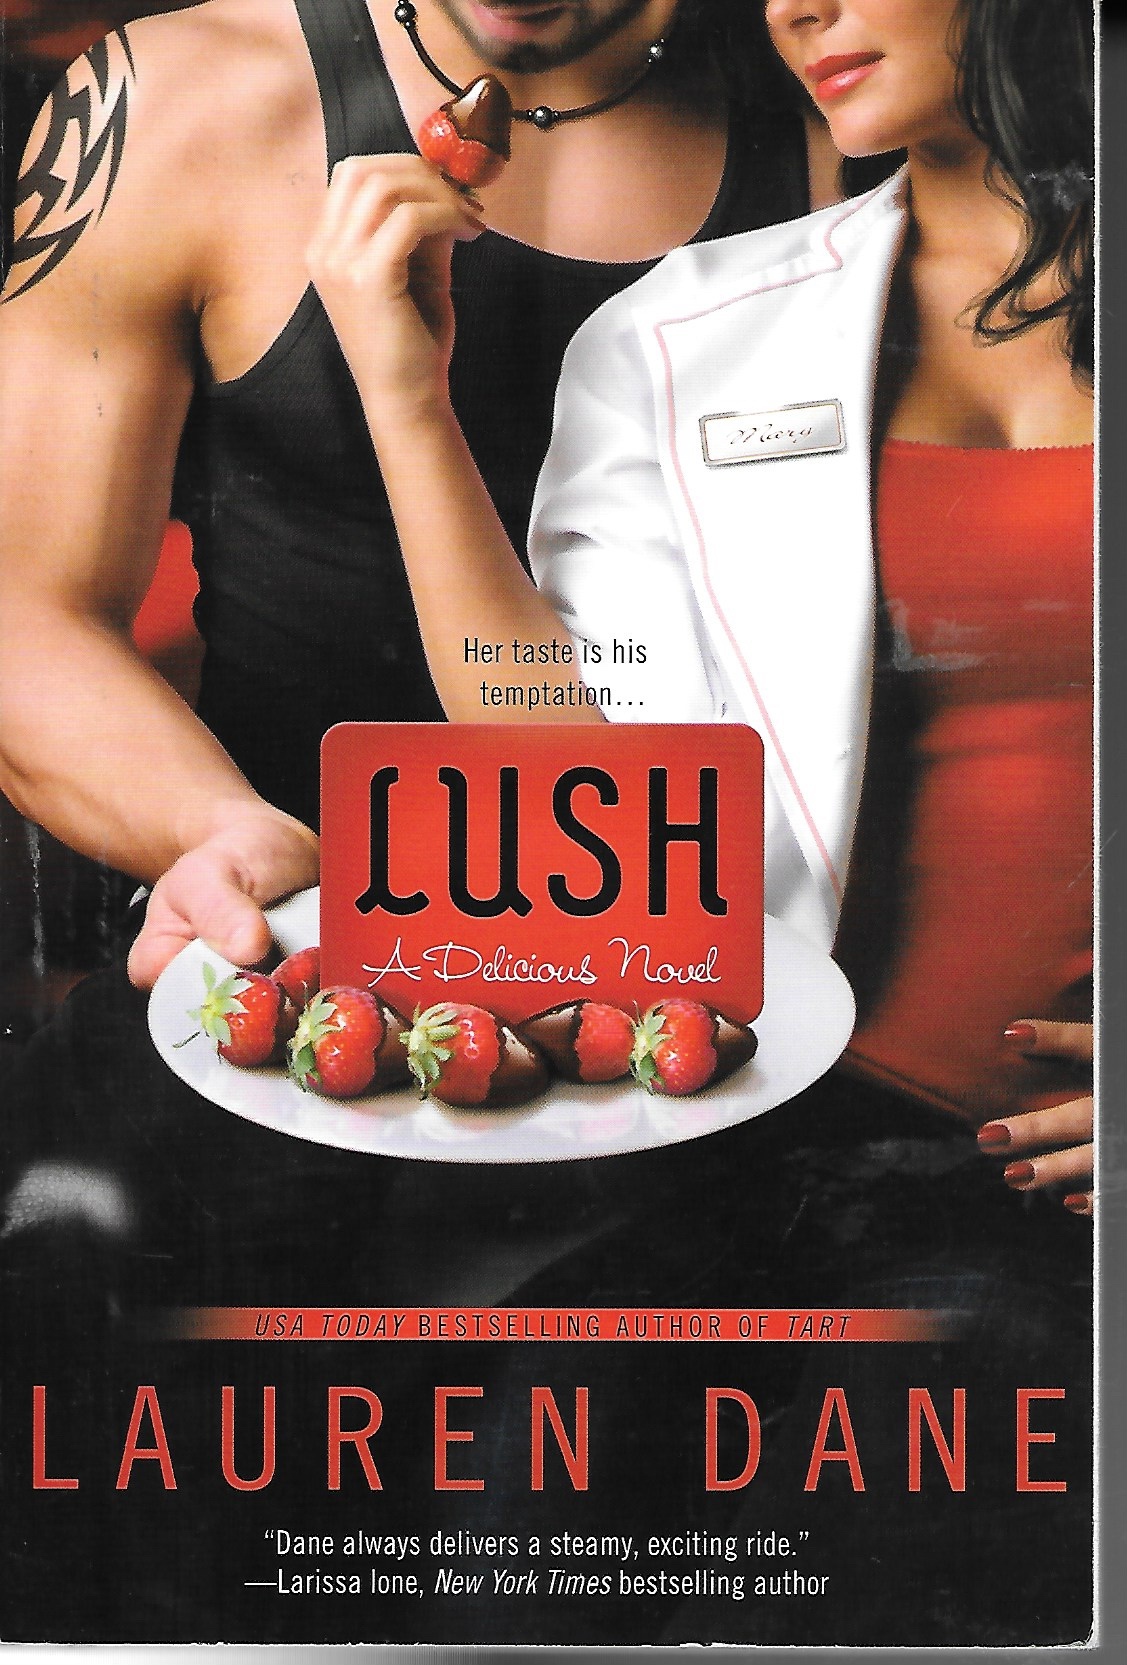 Image for Lush